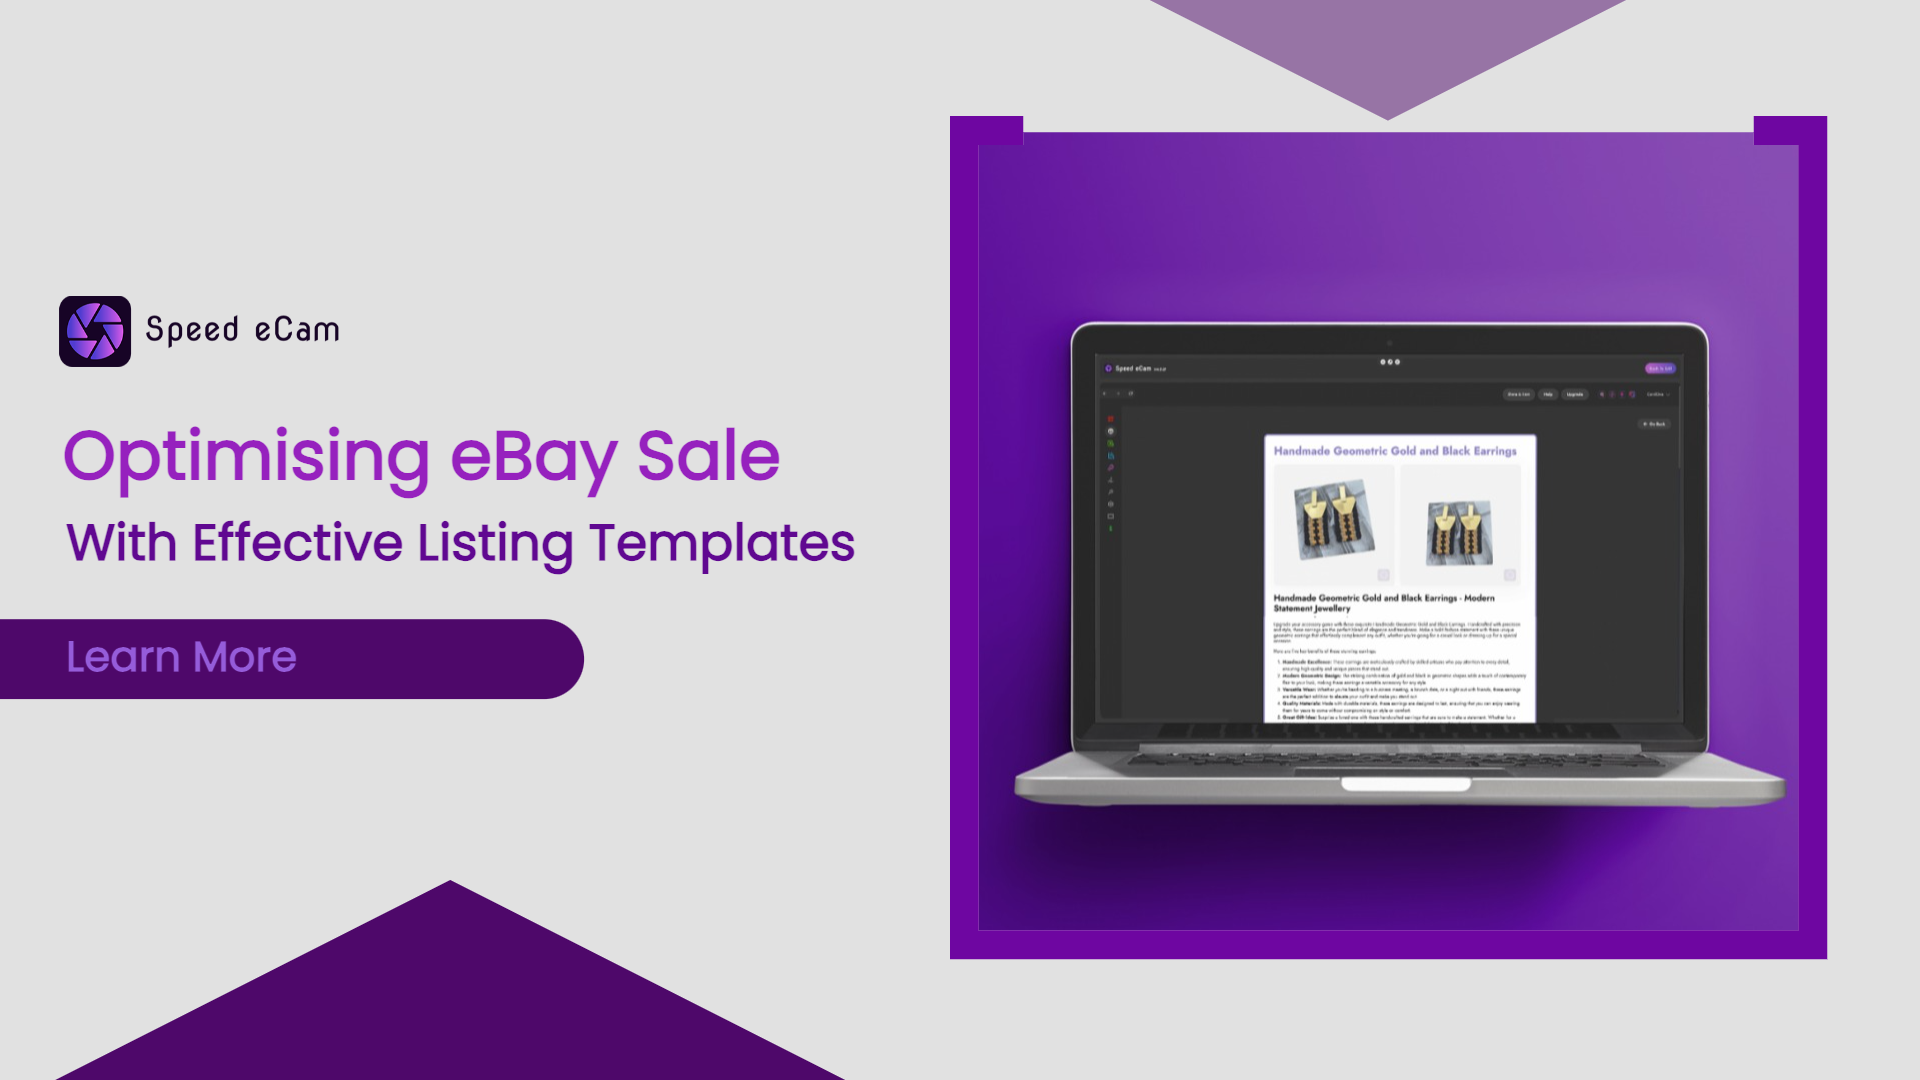 Optimising your eBay Sale with Effective Listing Templates